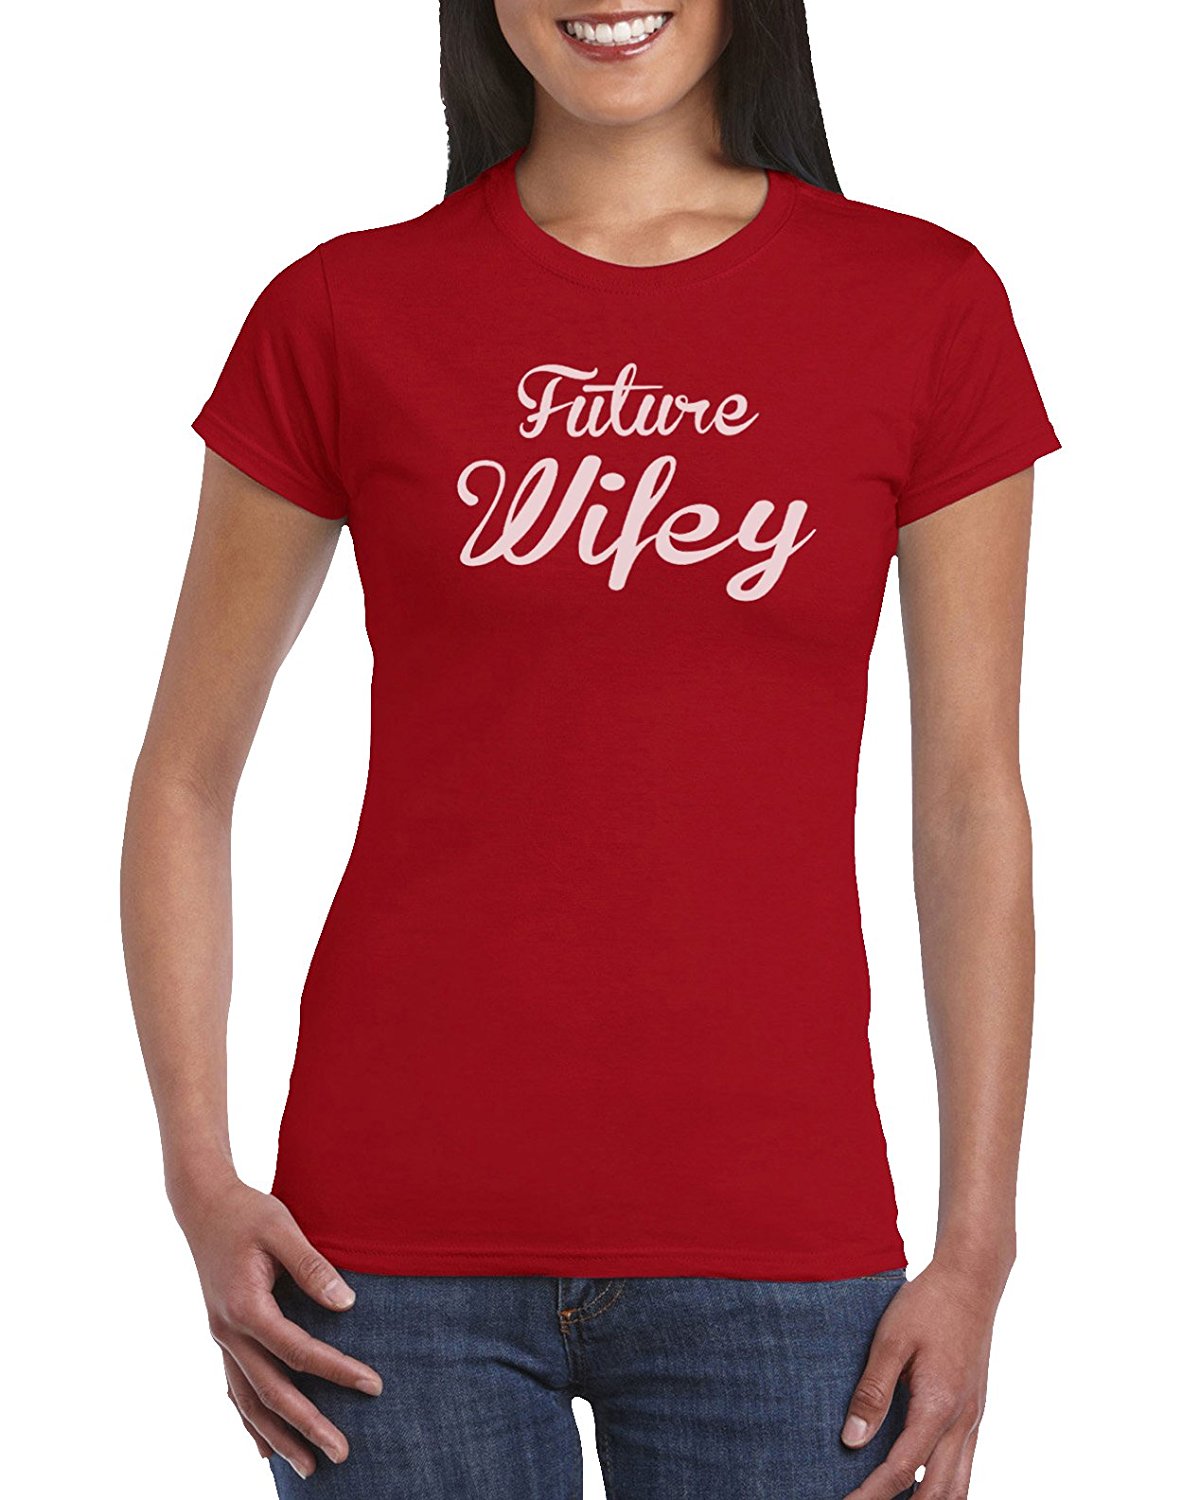 WIFEY T-Shirt with Embossed Puffy Print Design